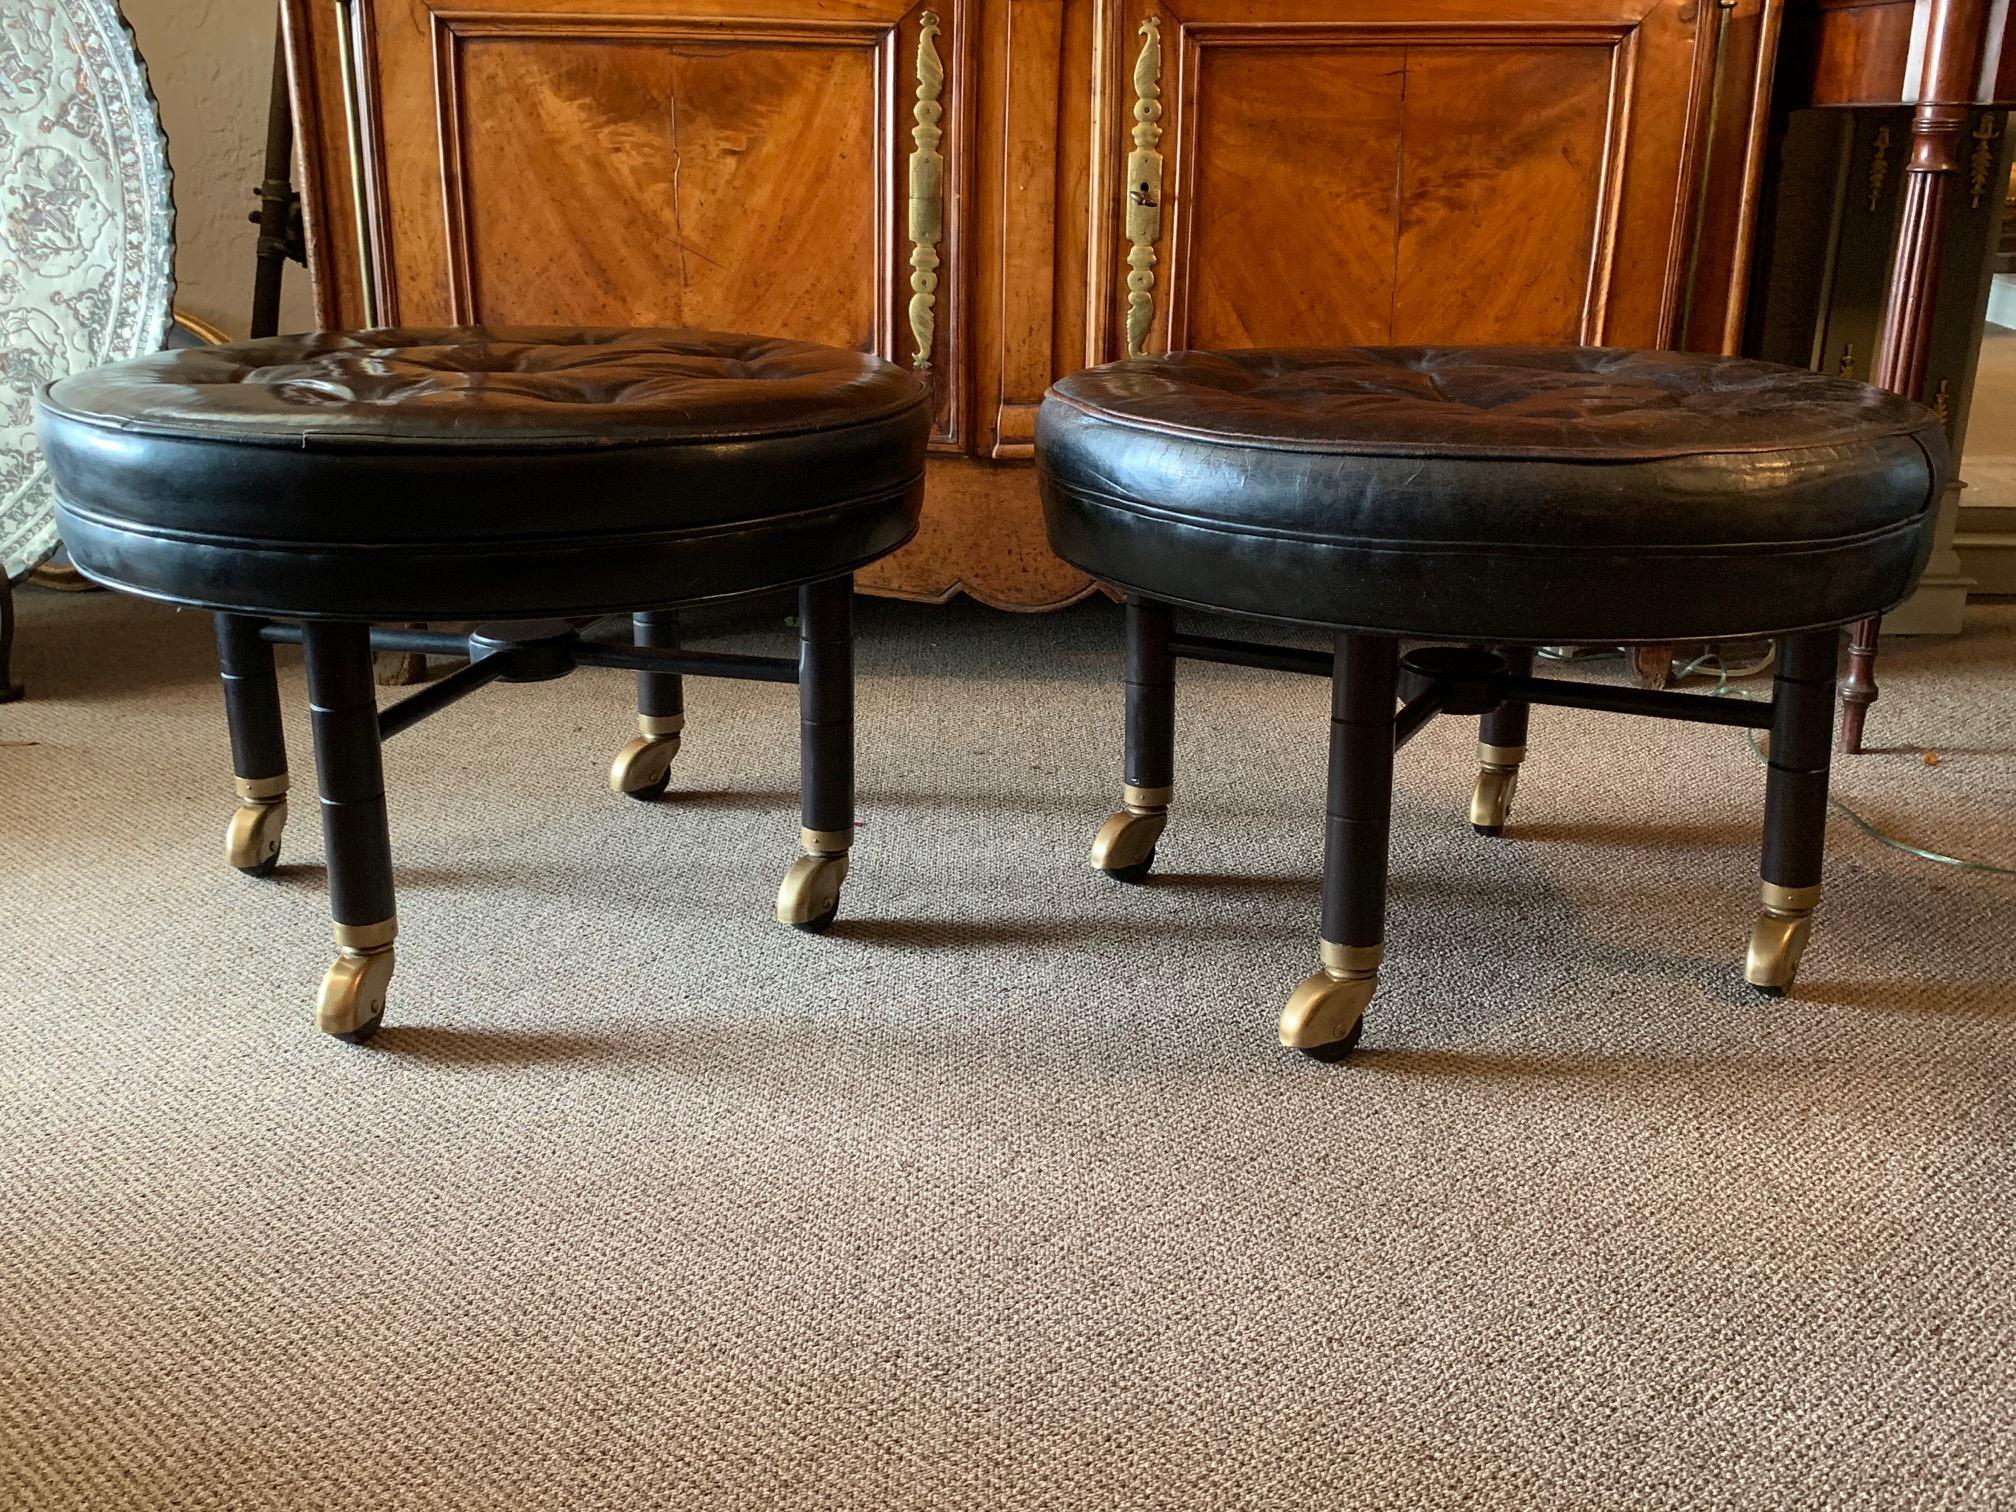 A pair of classic large scale ottomans by Baker on heavy casters. Original black leather tops. Frames restored.